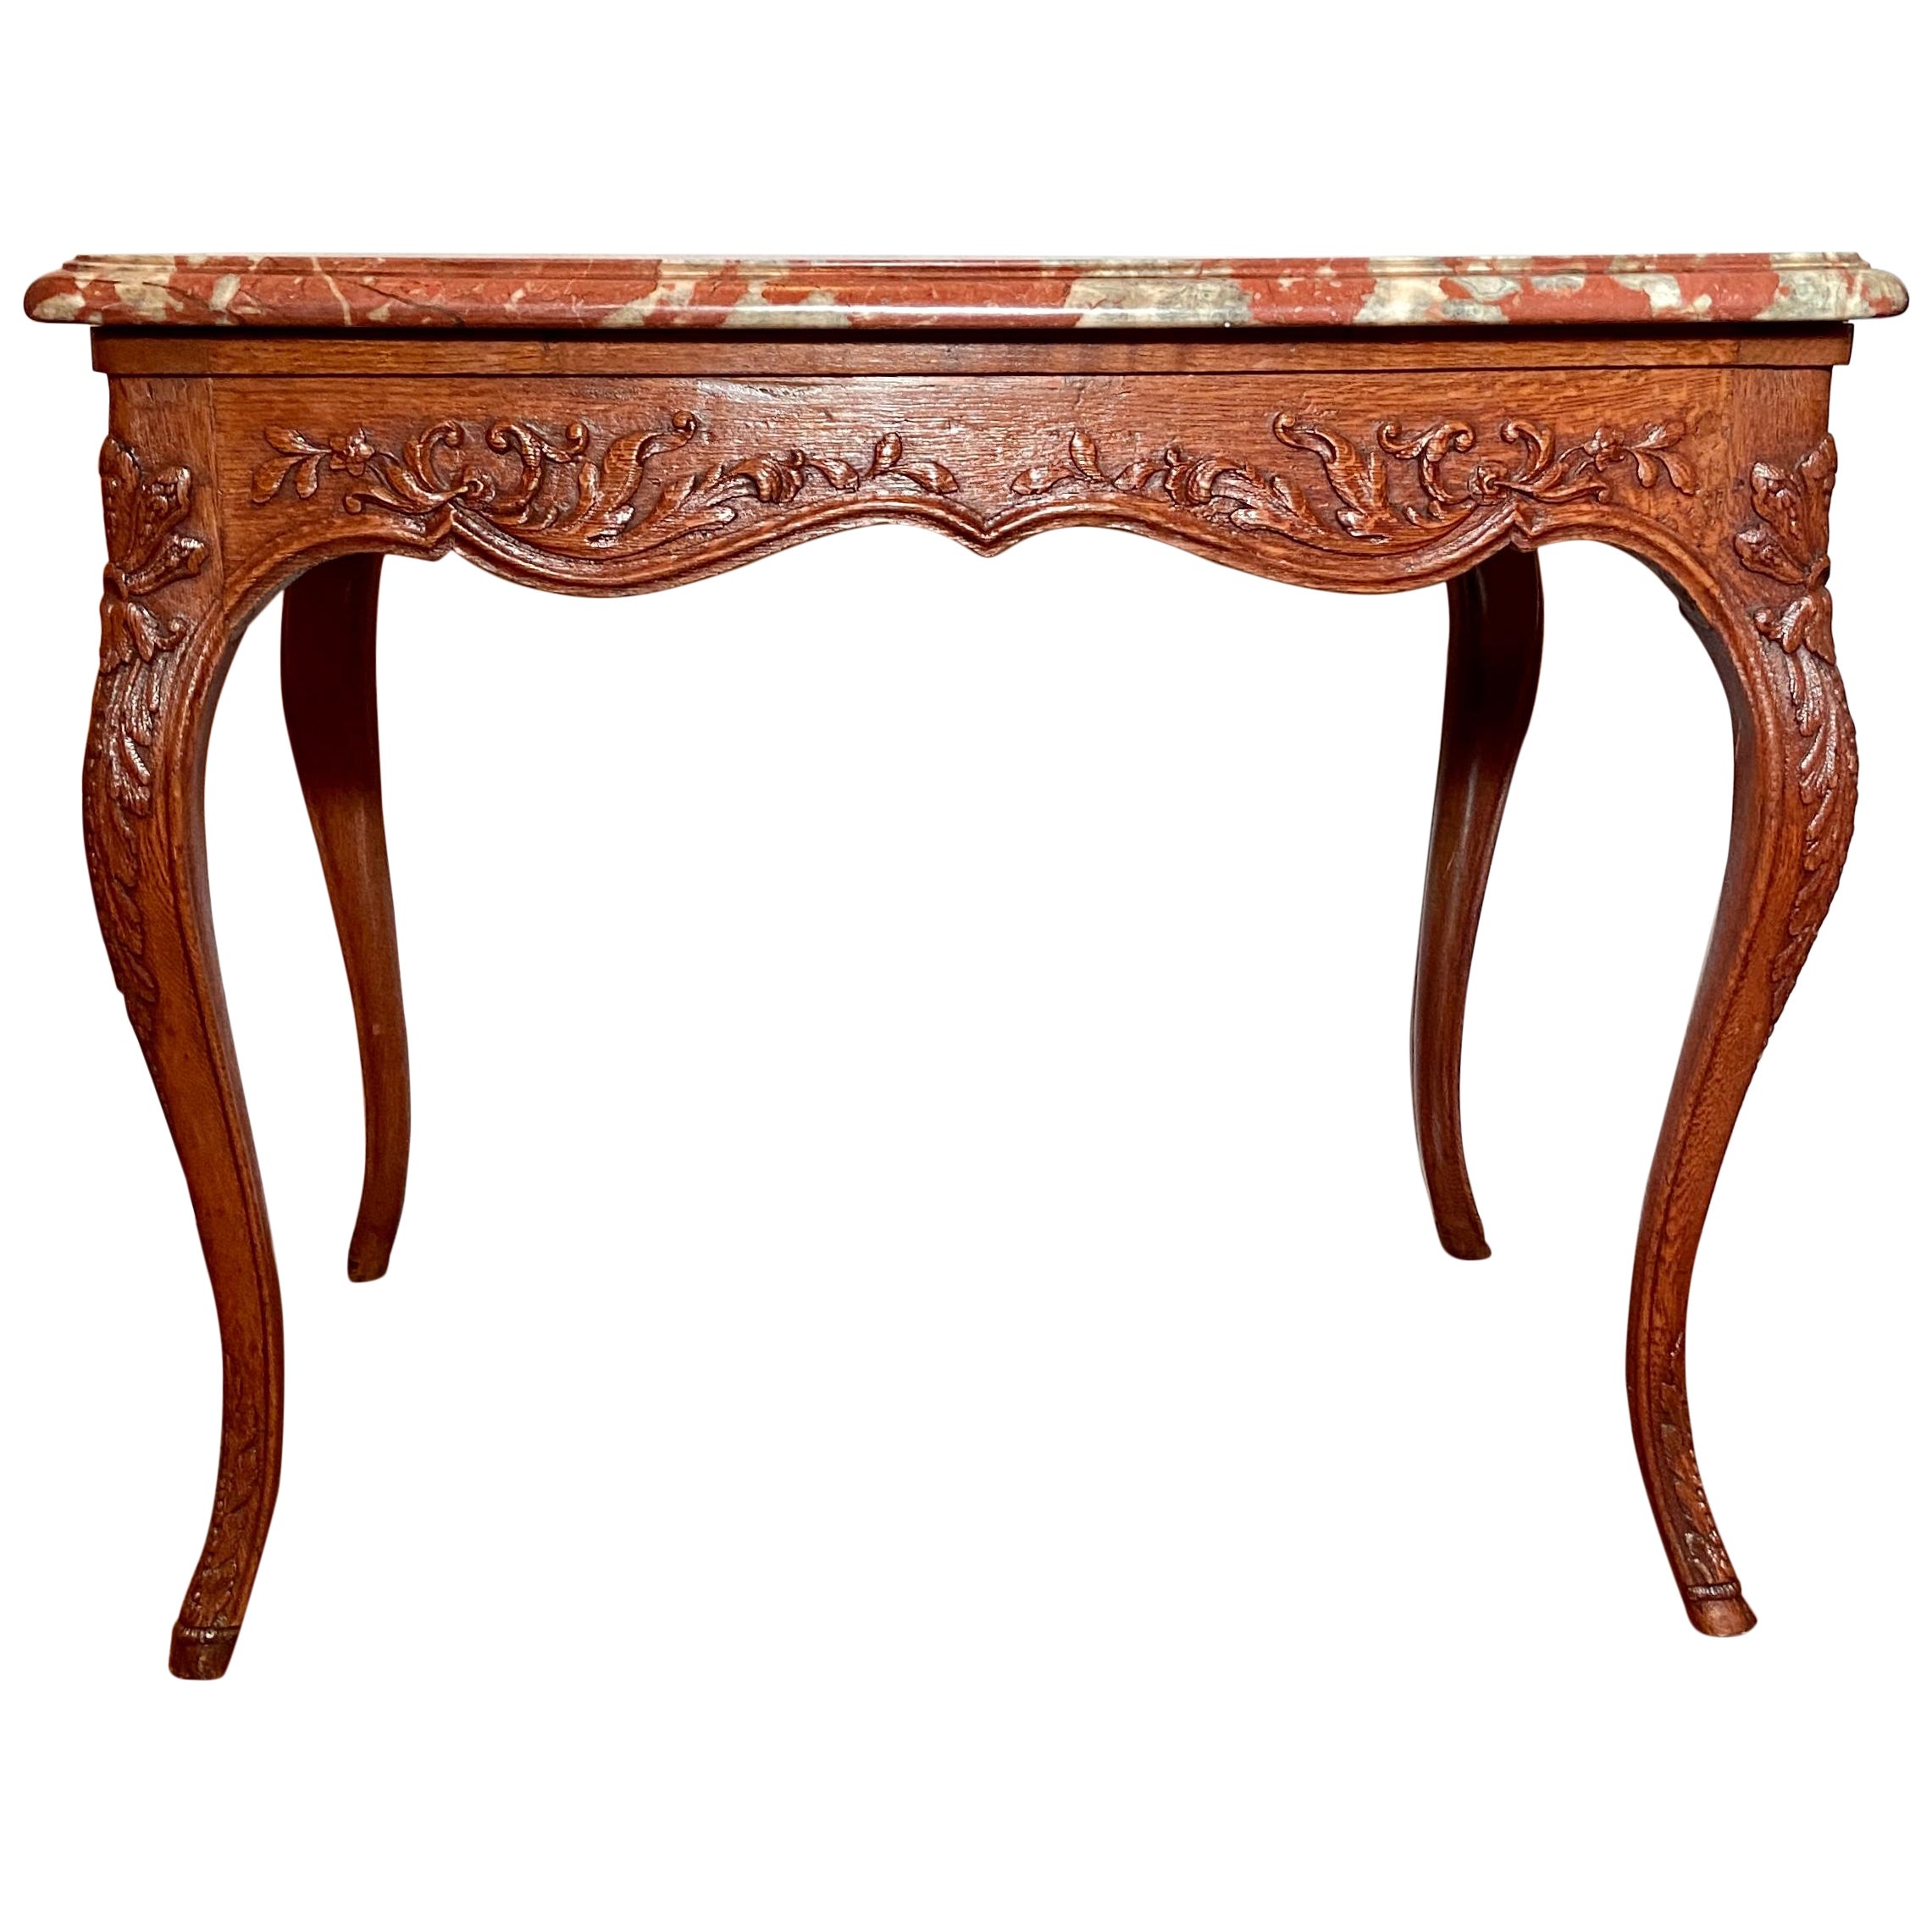 Antique French Provincial Carved Oak Marble Top Table, Circa 1860